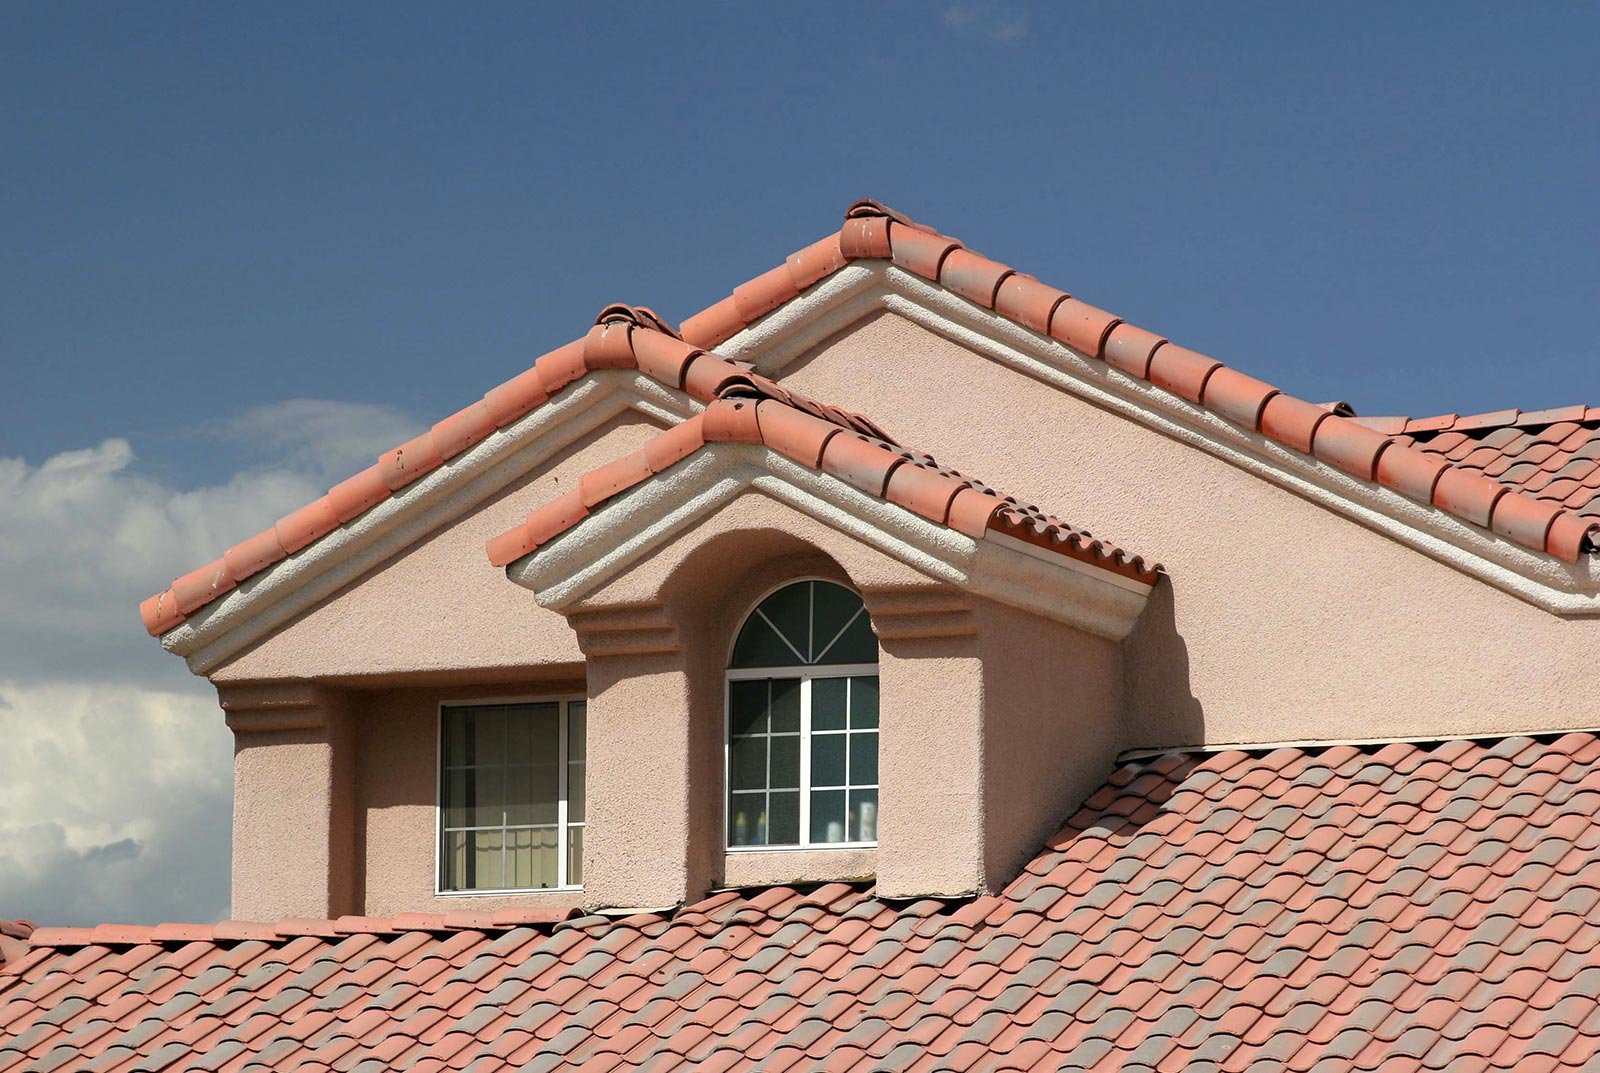 Services include replacement or repair of roof, tearing off old roof. 